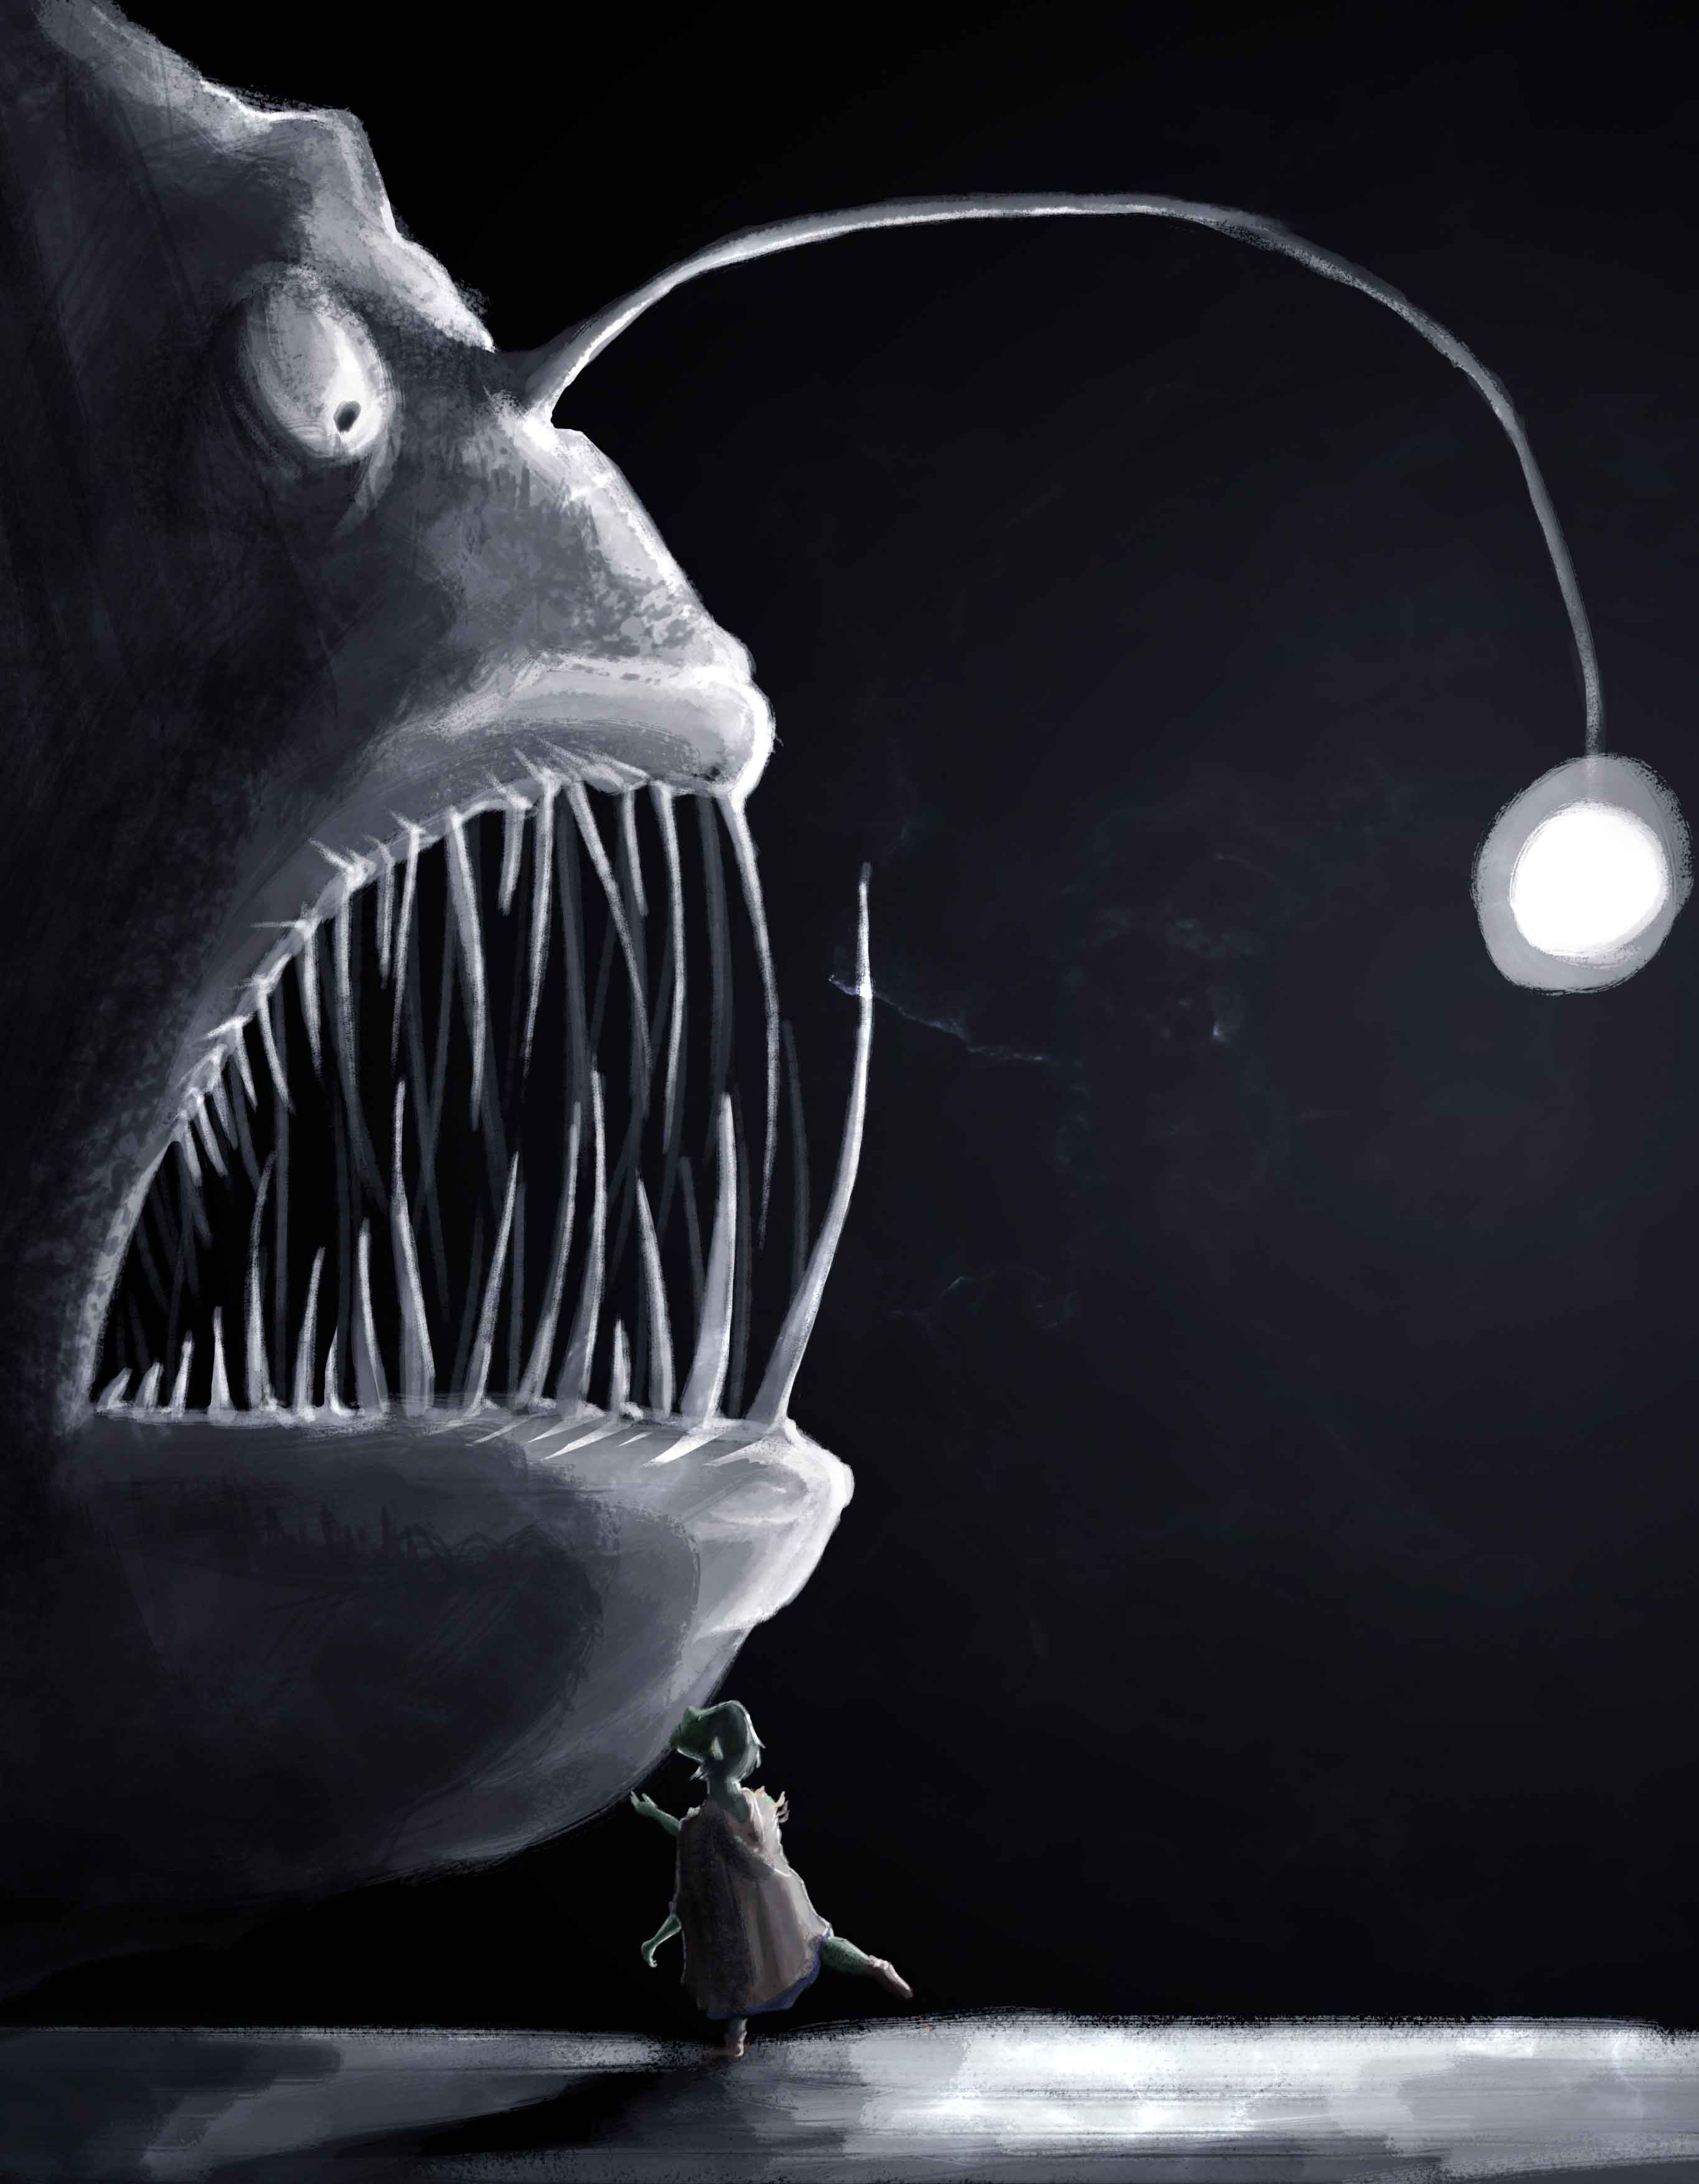 A little goblin kisses a ghostly angler fish.